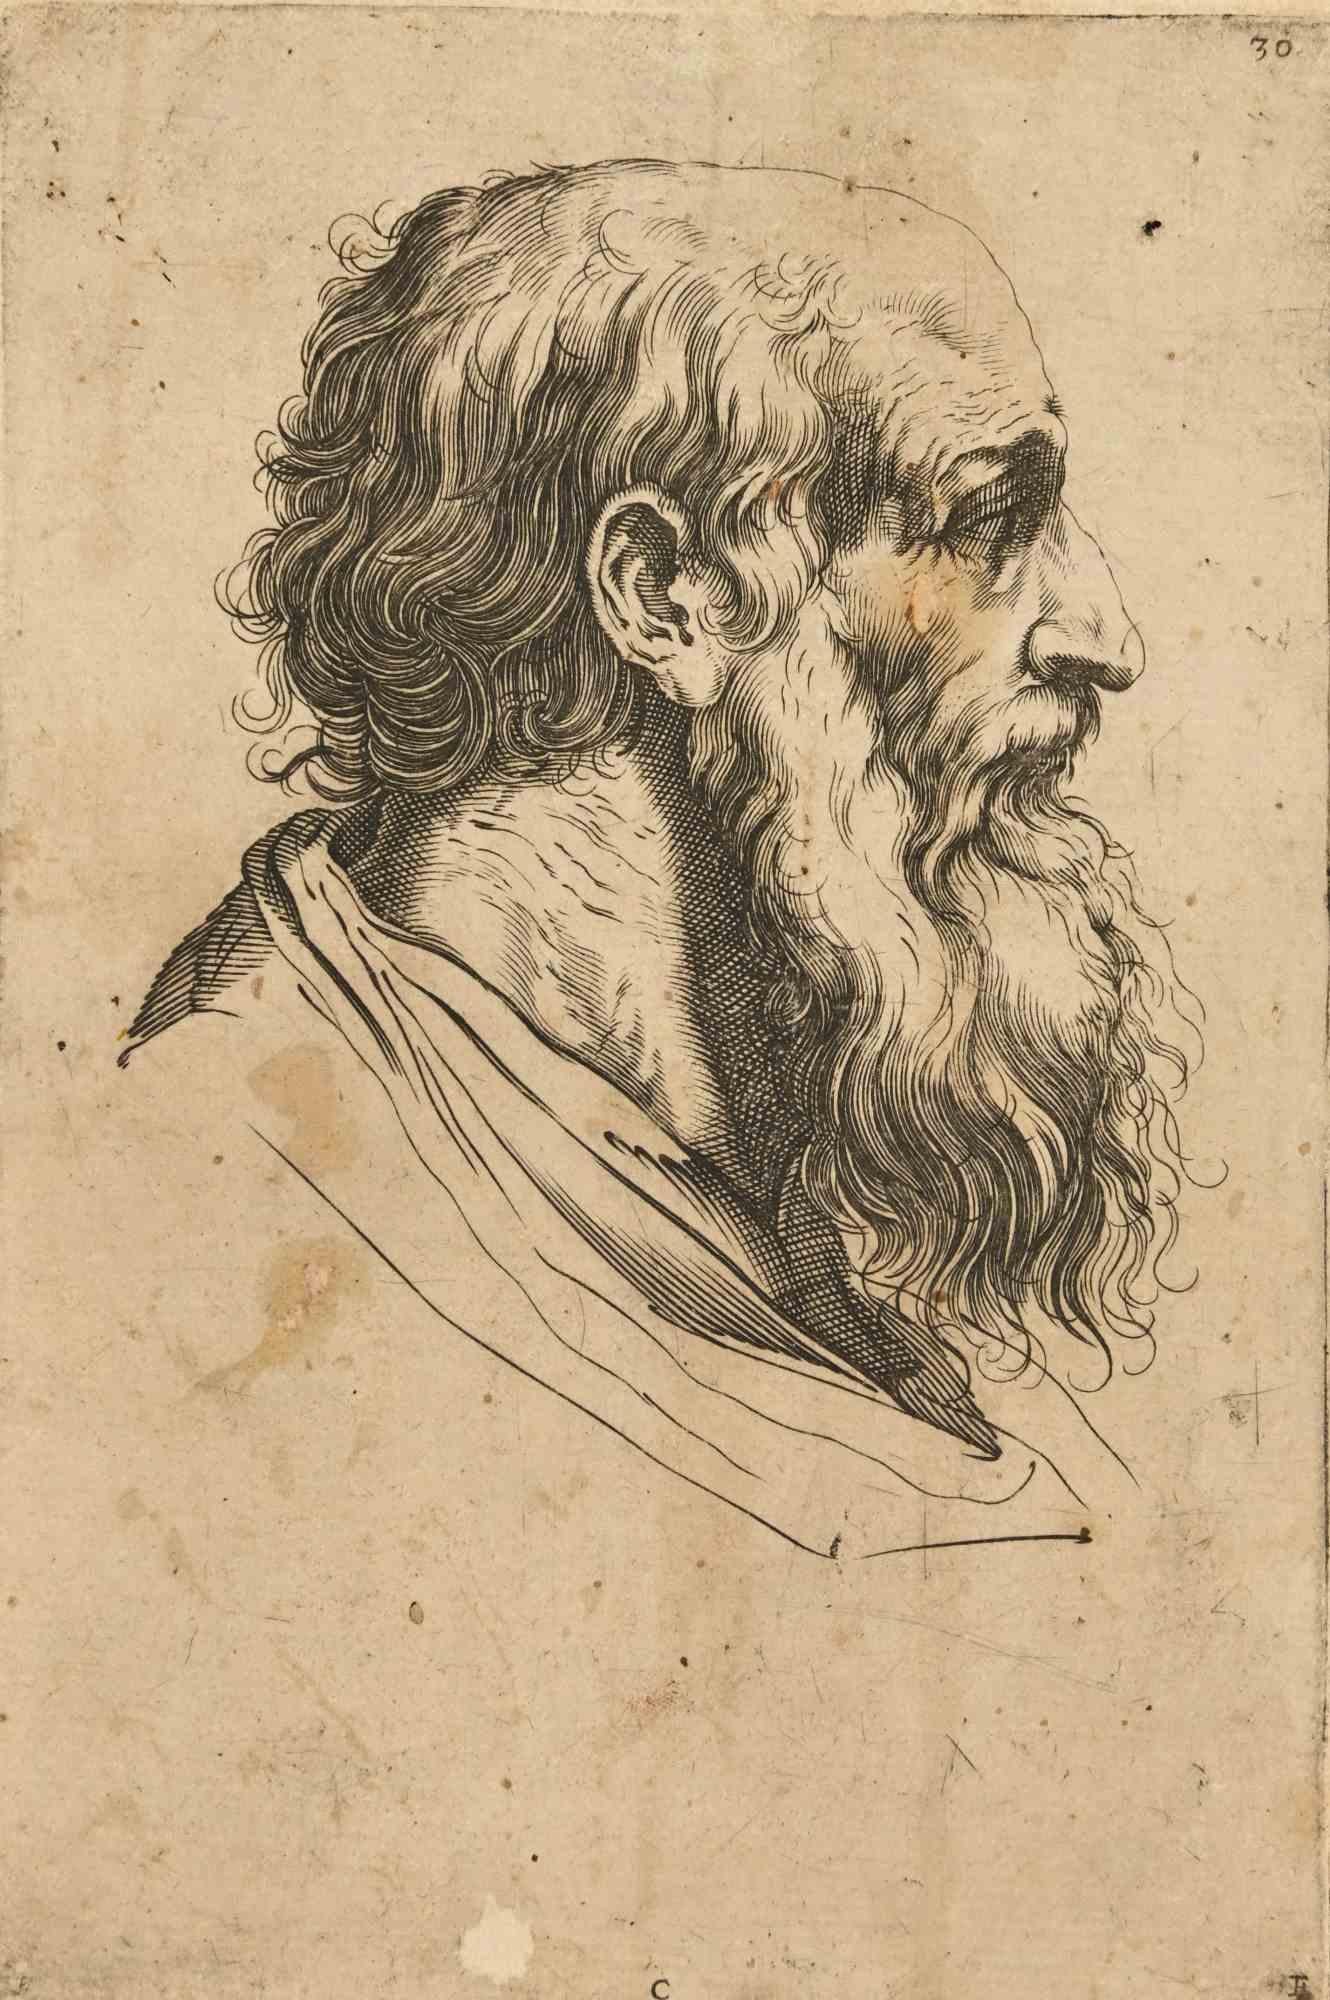 Unknown Figurative Print - The Profile - Etching - 17th Century